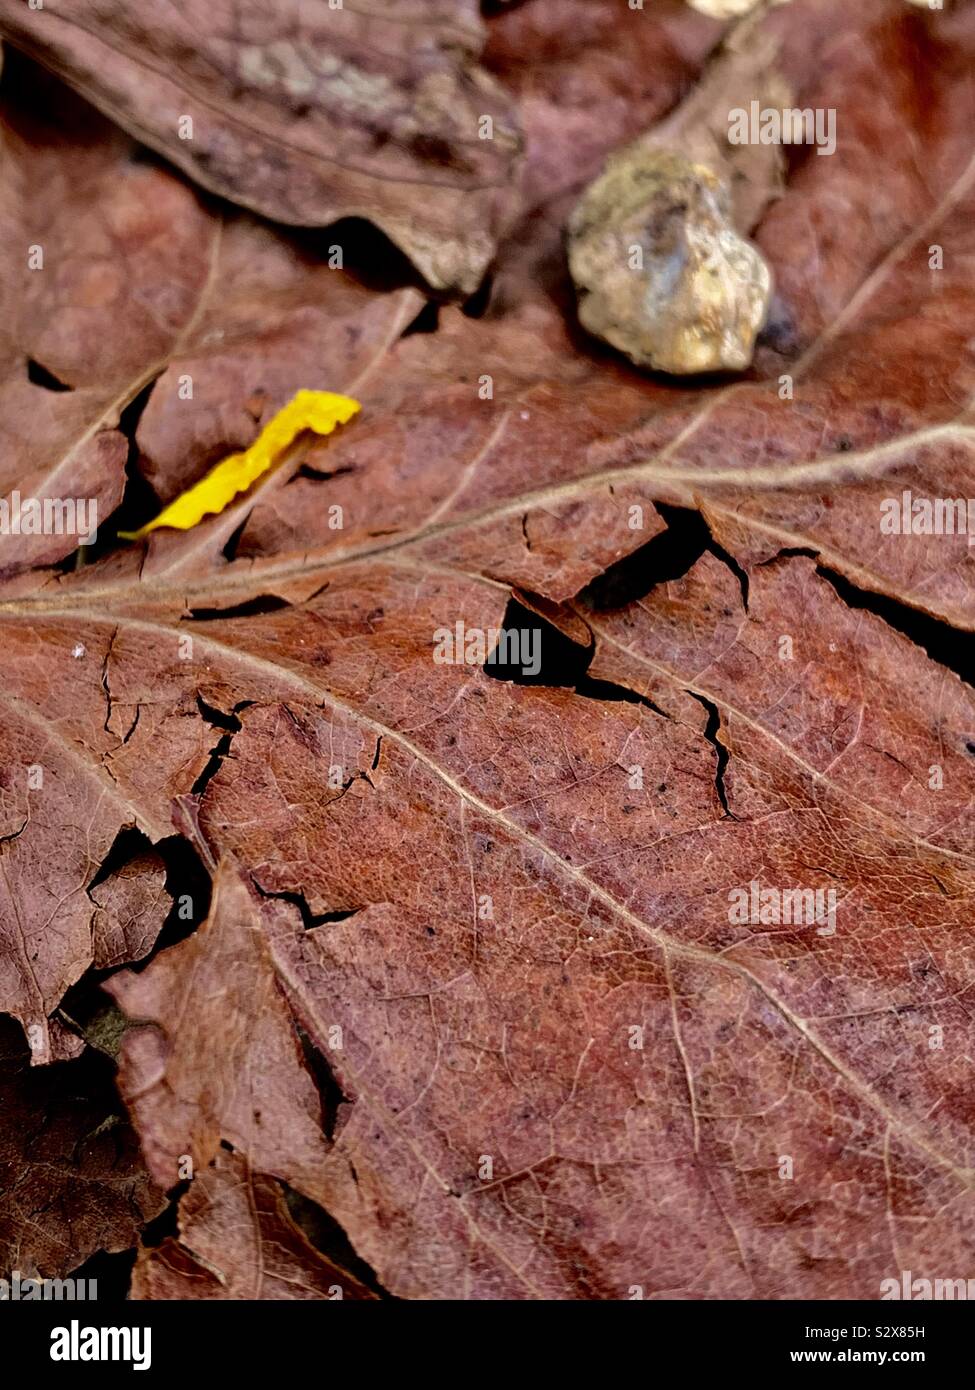 Dead leaf laying on the ground, evidently cracked in many parts; a little stone and yellow petal fallen on top of it Stock Photo